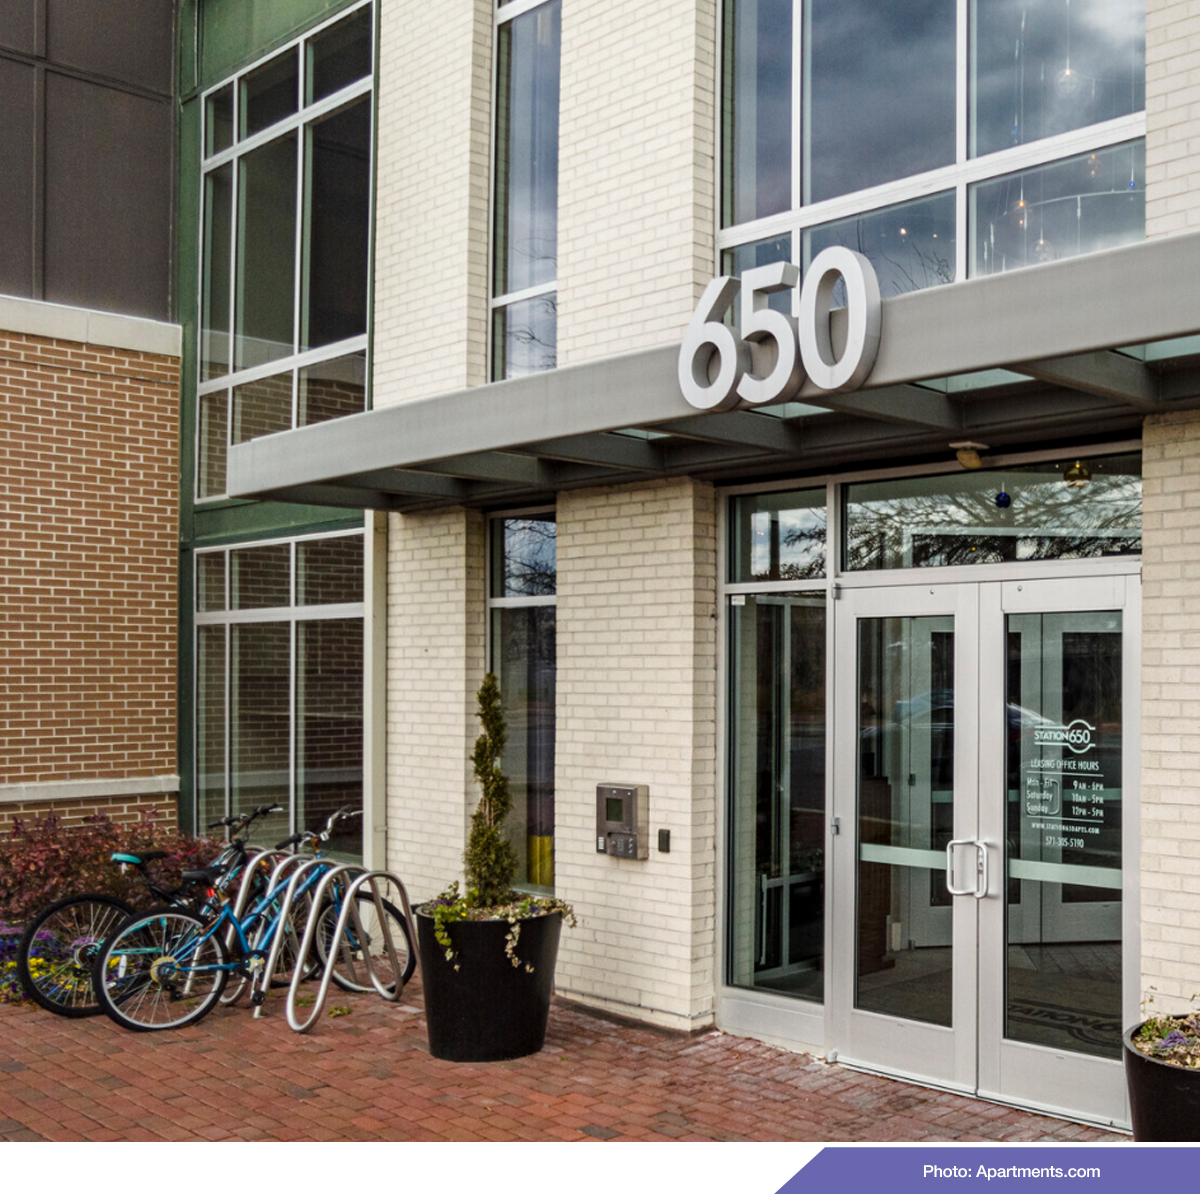 Our Station 650 project several years back brought new apartments to the heart of Alexandria, VA with partners Wood Partners, @ktgy_group, @CBGBuildingCo, and @MIWindows1947.
#windowinstallation #builder #glassandglazing #architecture #fenestration